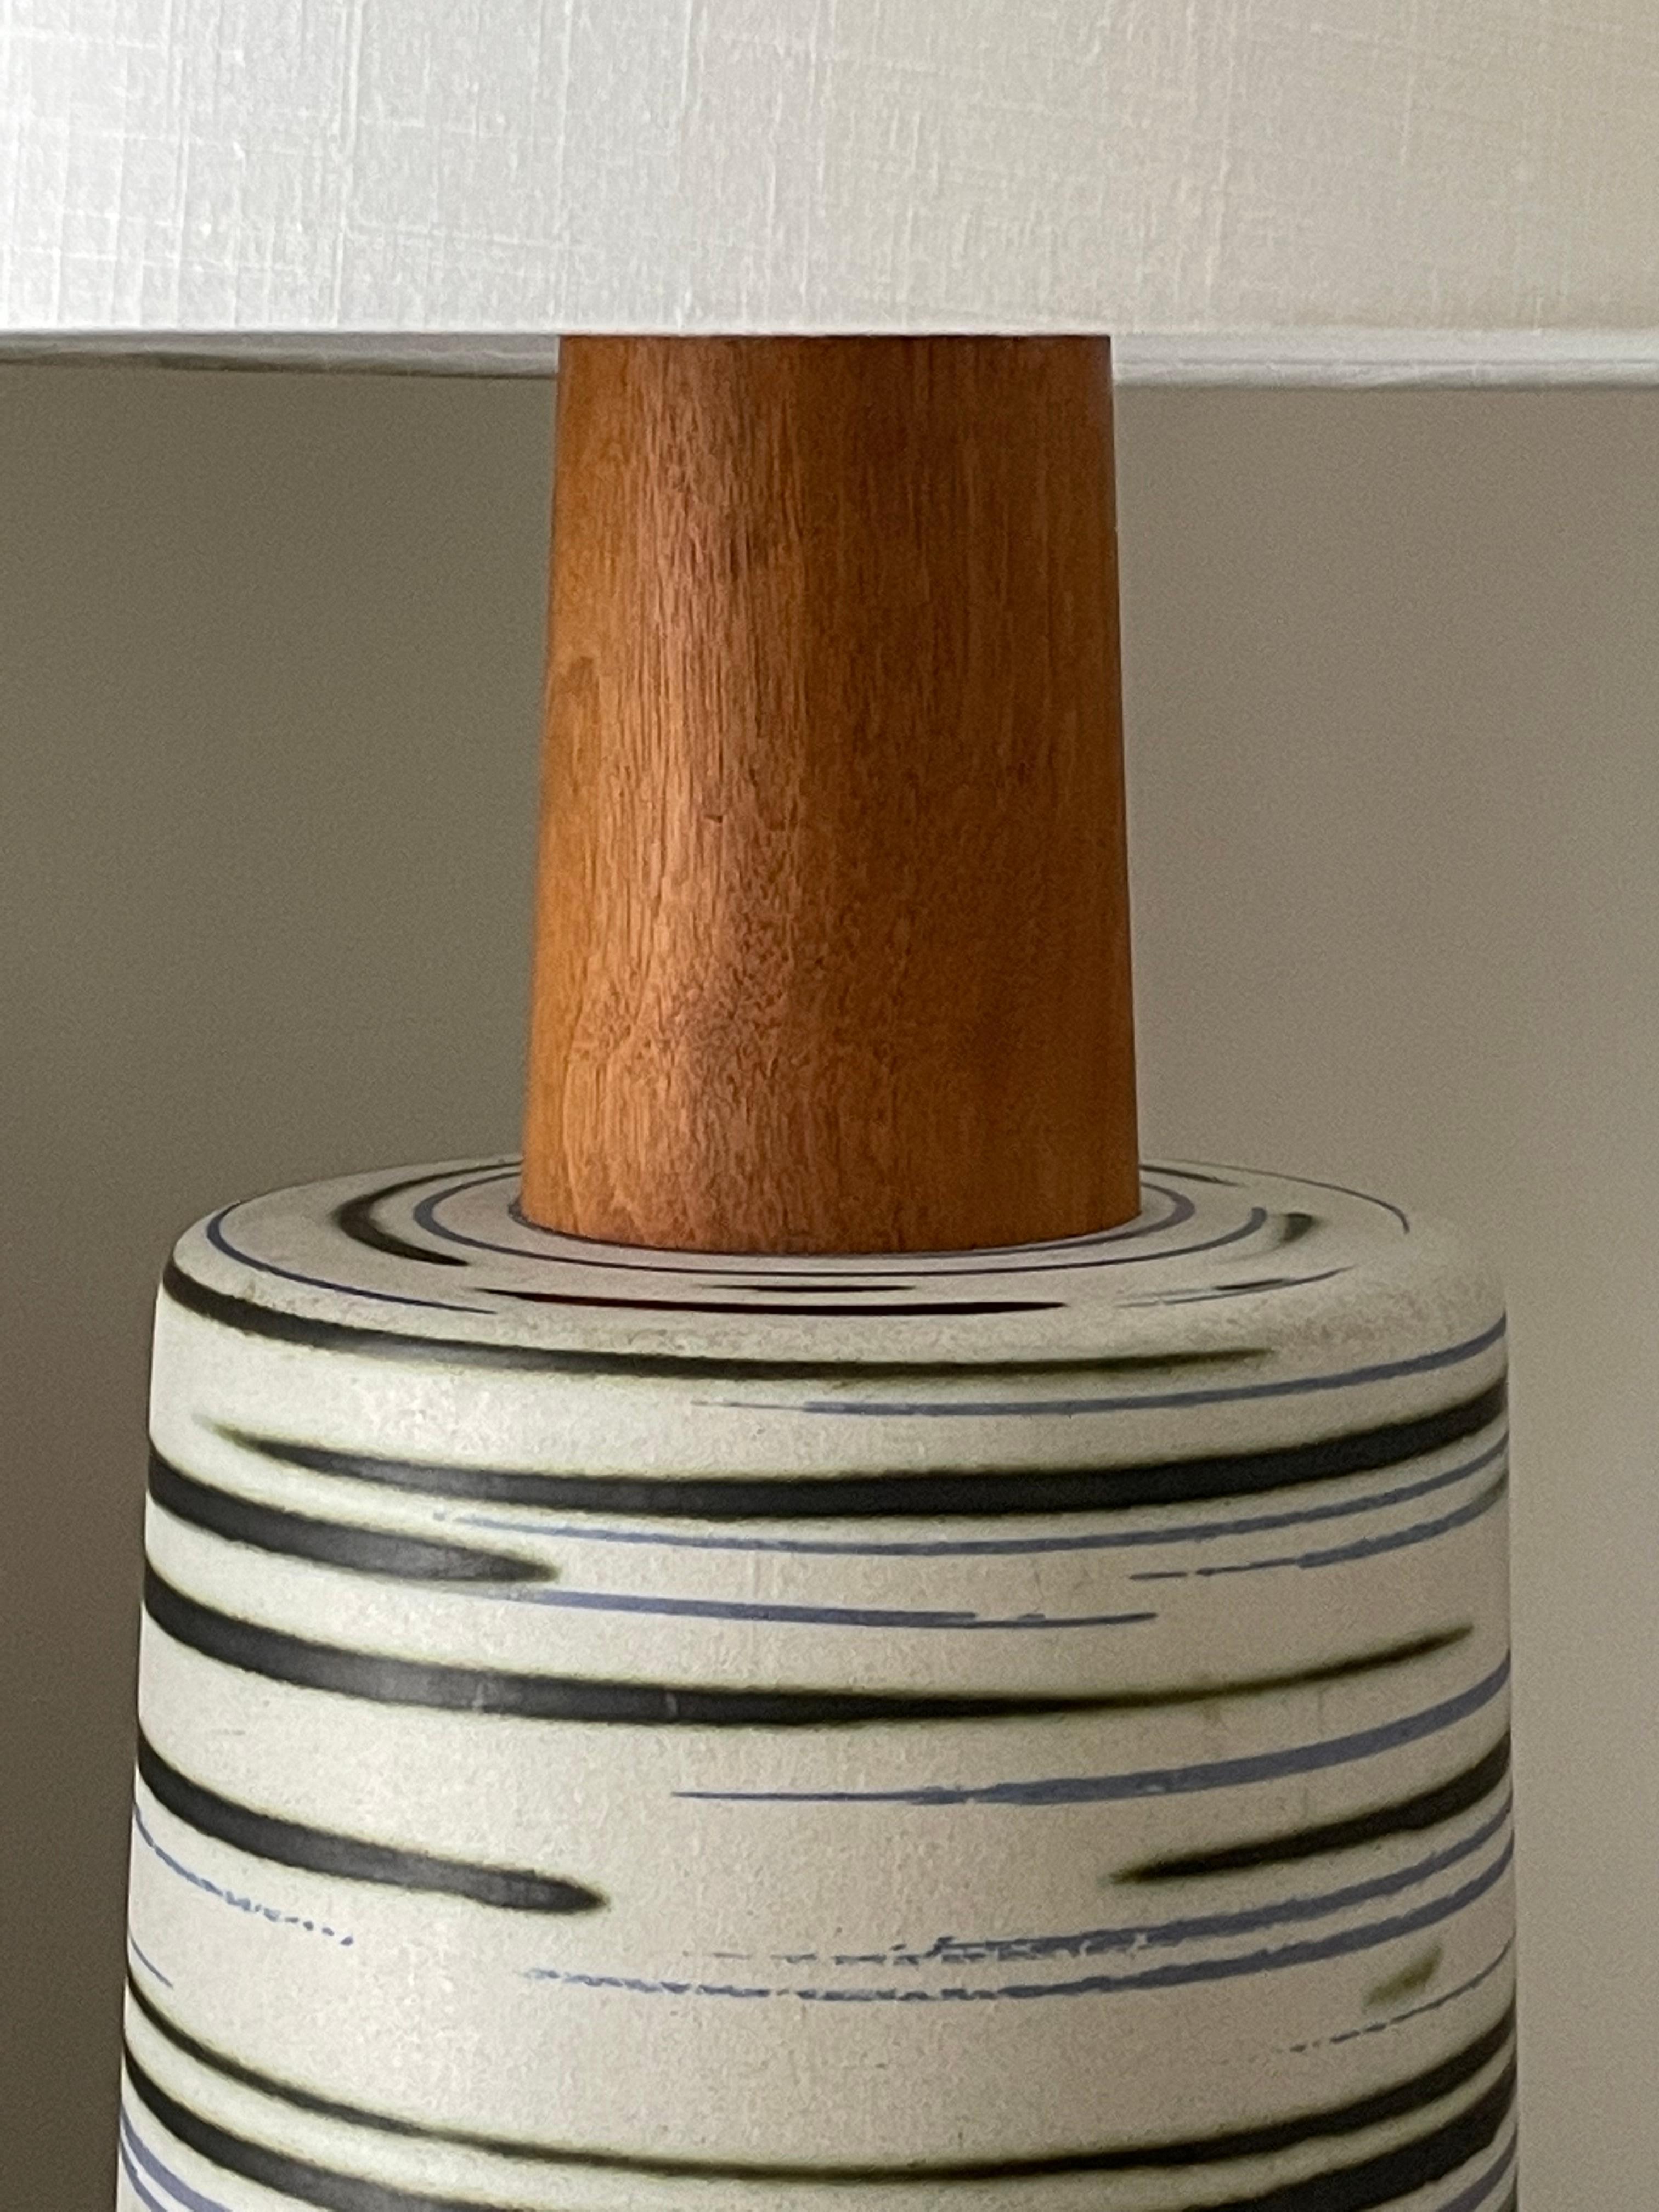 A truly monumental lamp by famed ceramicist duo Jane and Gordon Martz for Marshall Studios. This lamp features a massive ceramic body with big walnut neck and matching finial. Ceramic body is complete with a predominately white body with accents of